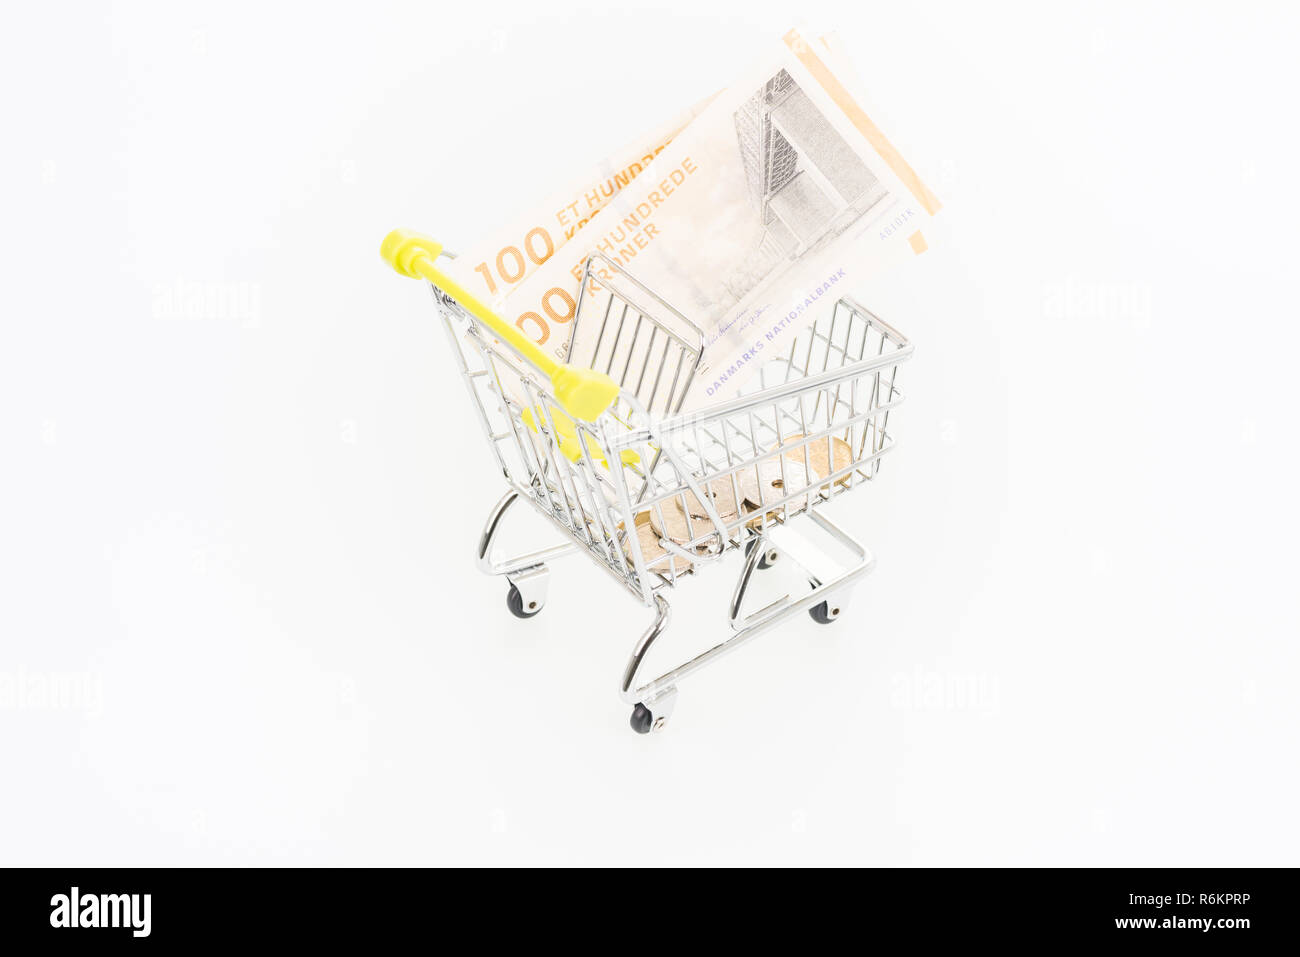 Miniature shopping cart with Danish Krone banknotes and coins Stock Photo